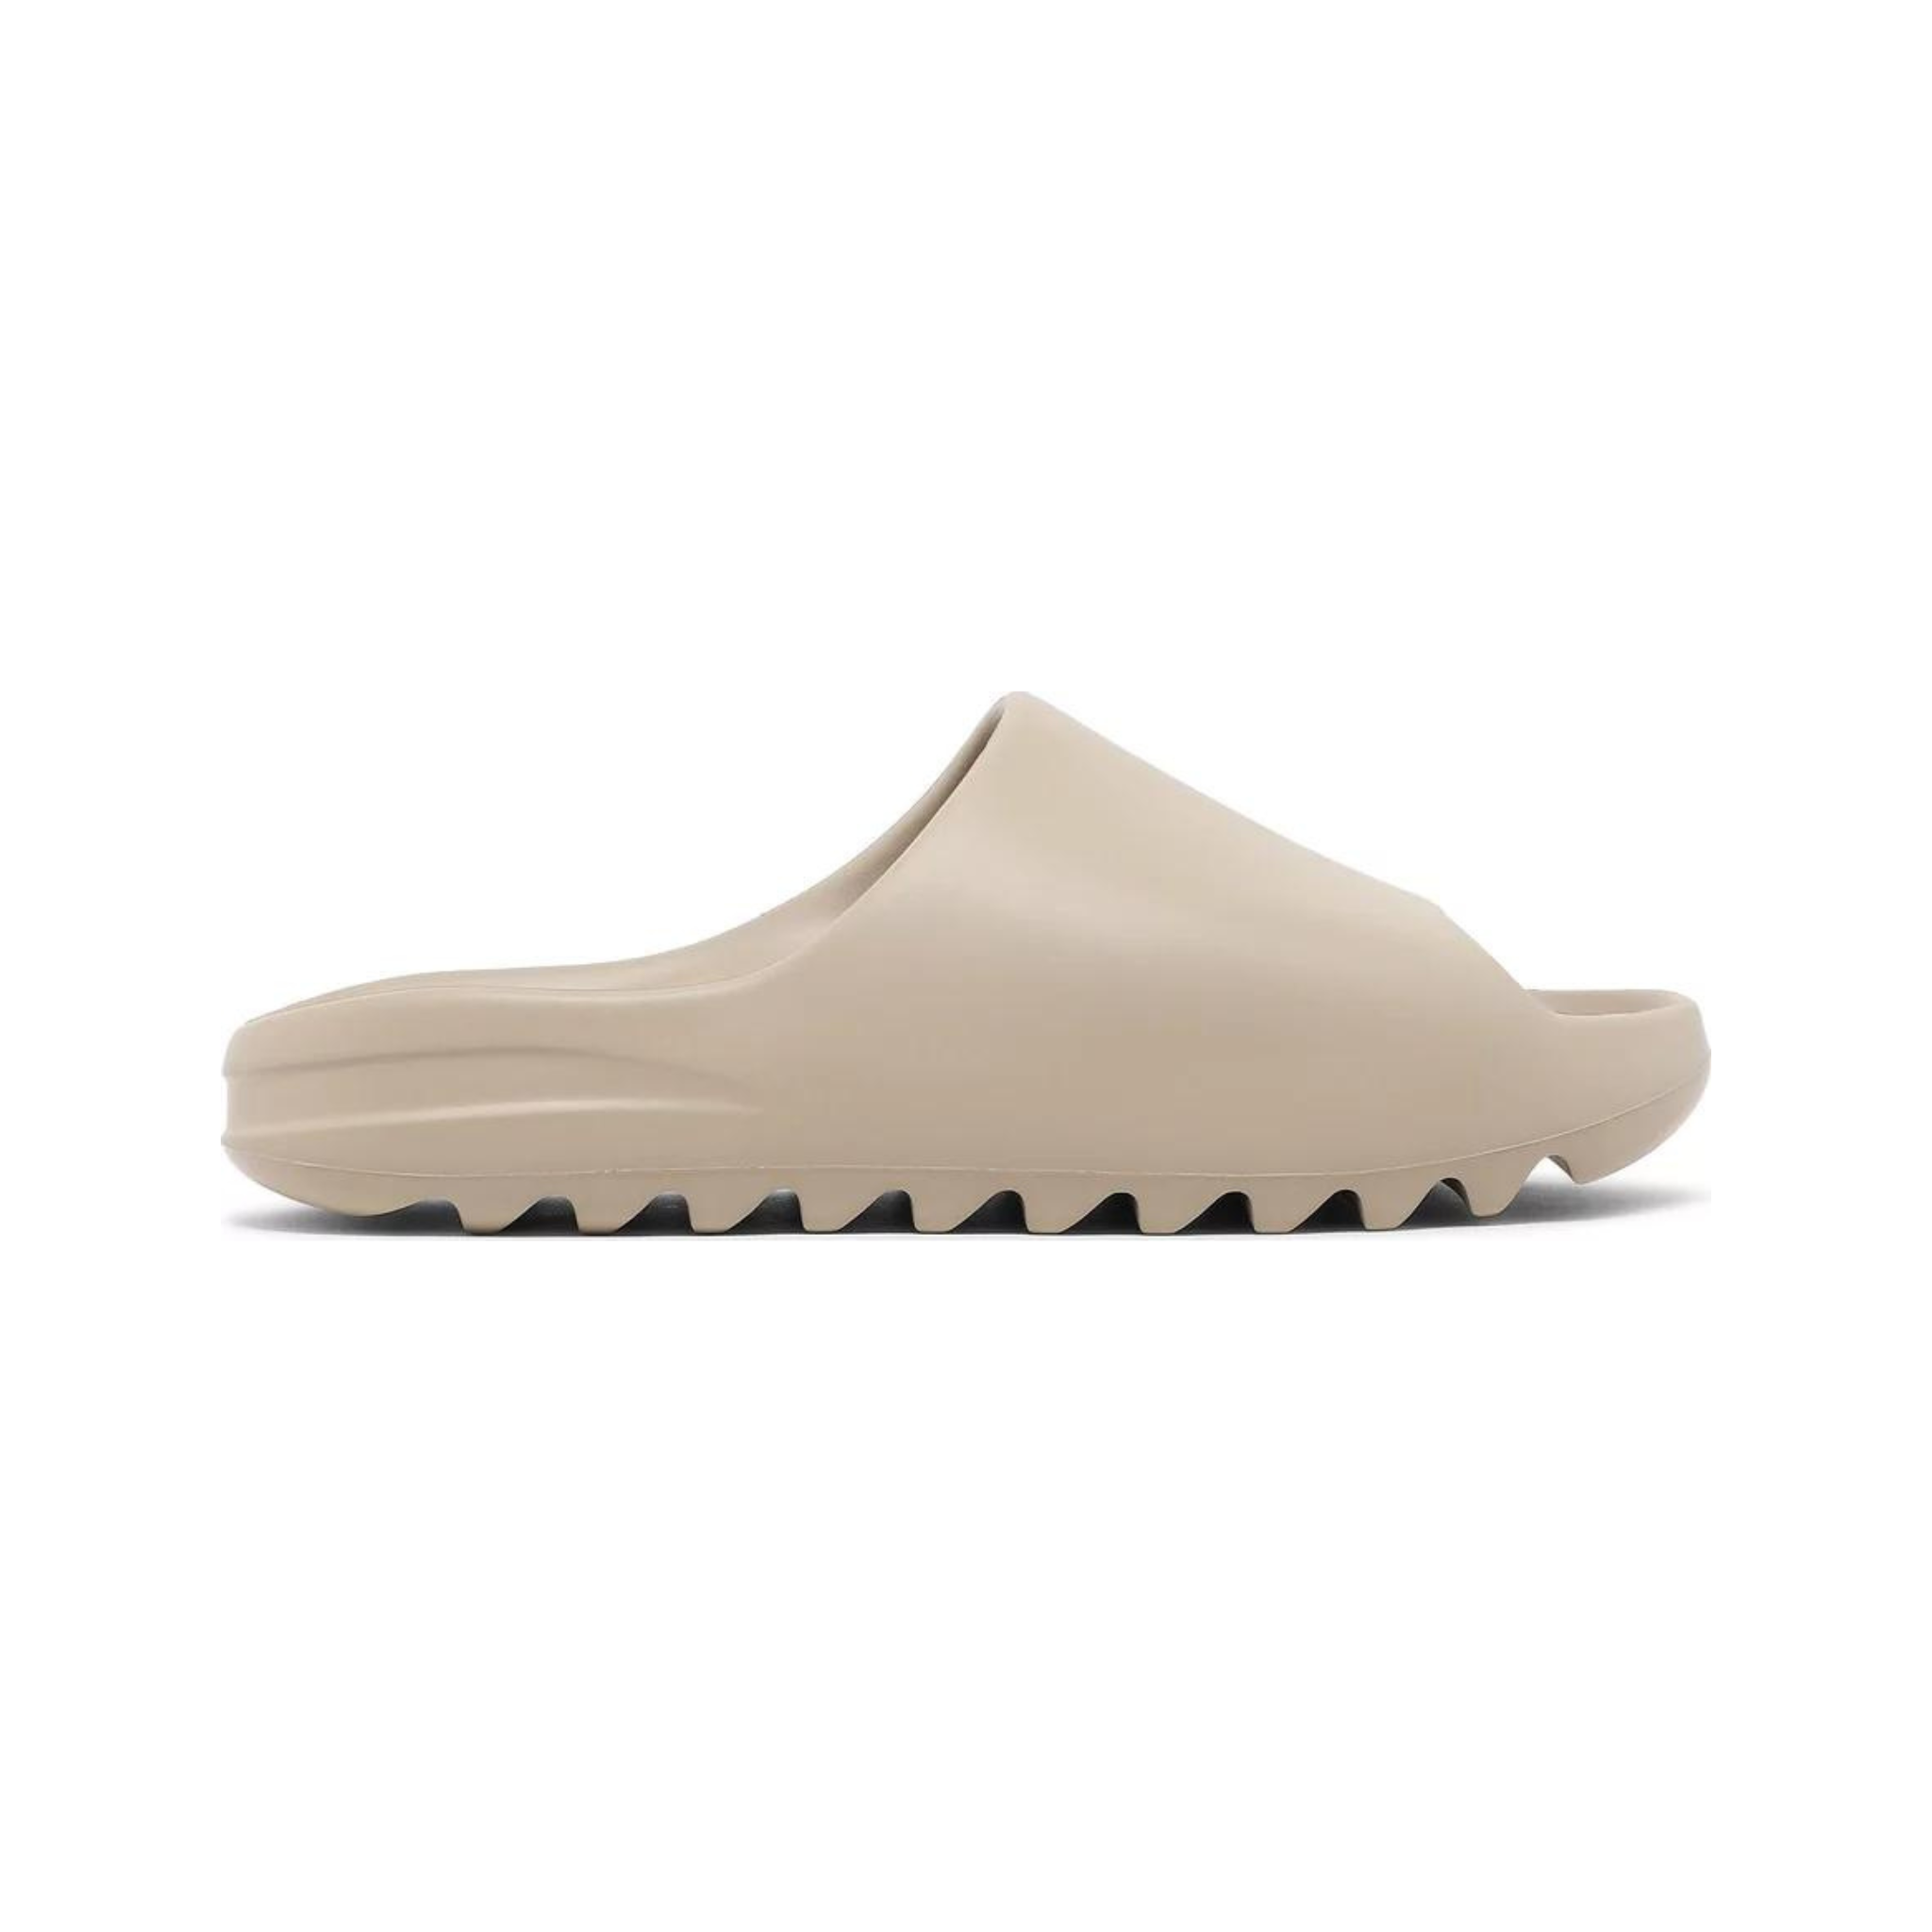 Adidas Yeezy Slide Pure (First Release)